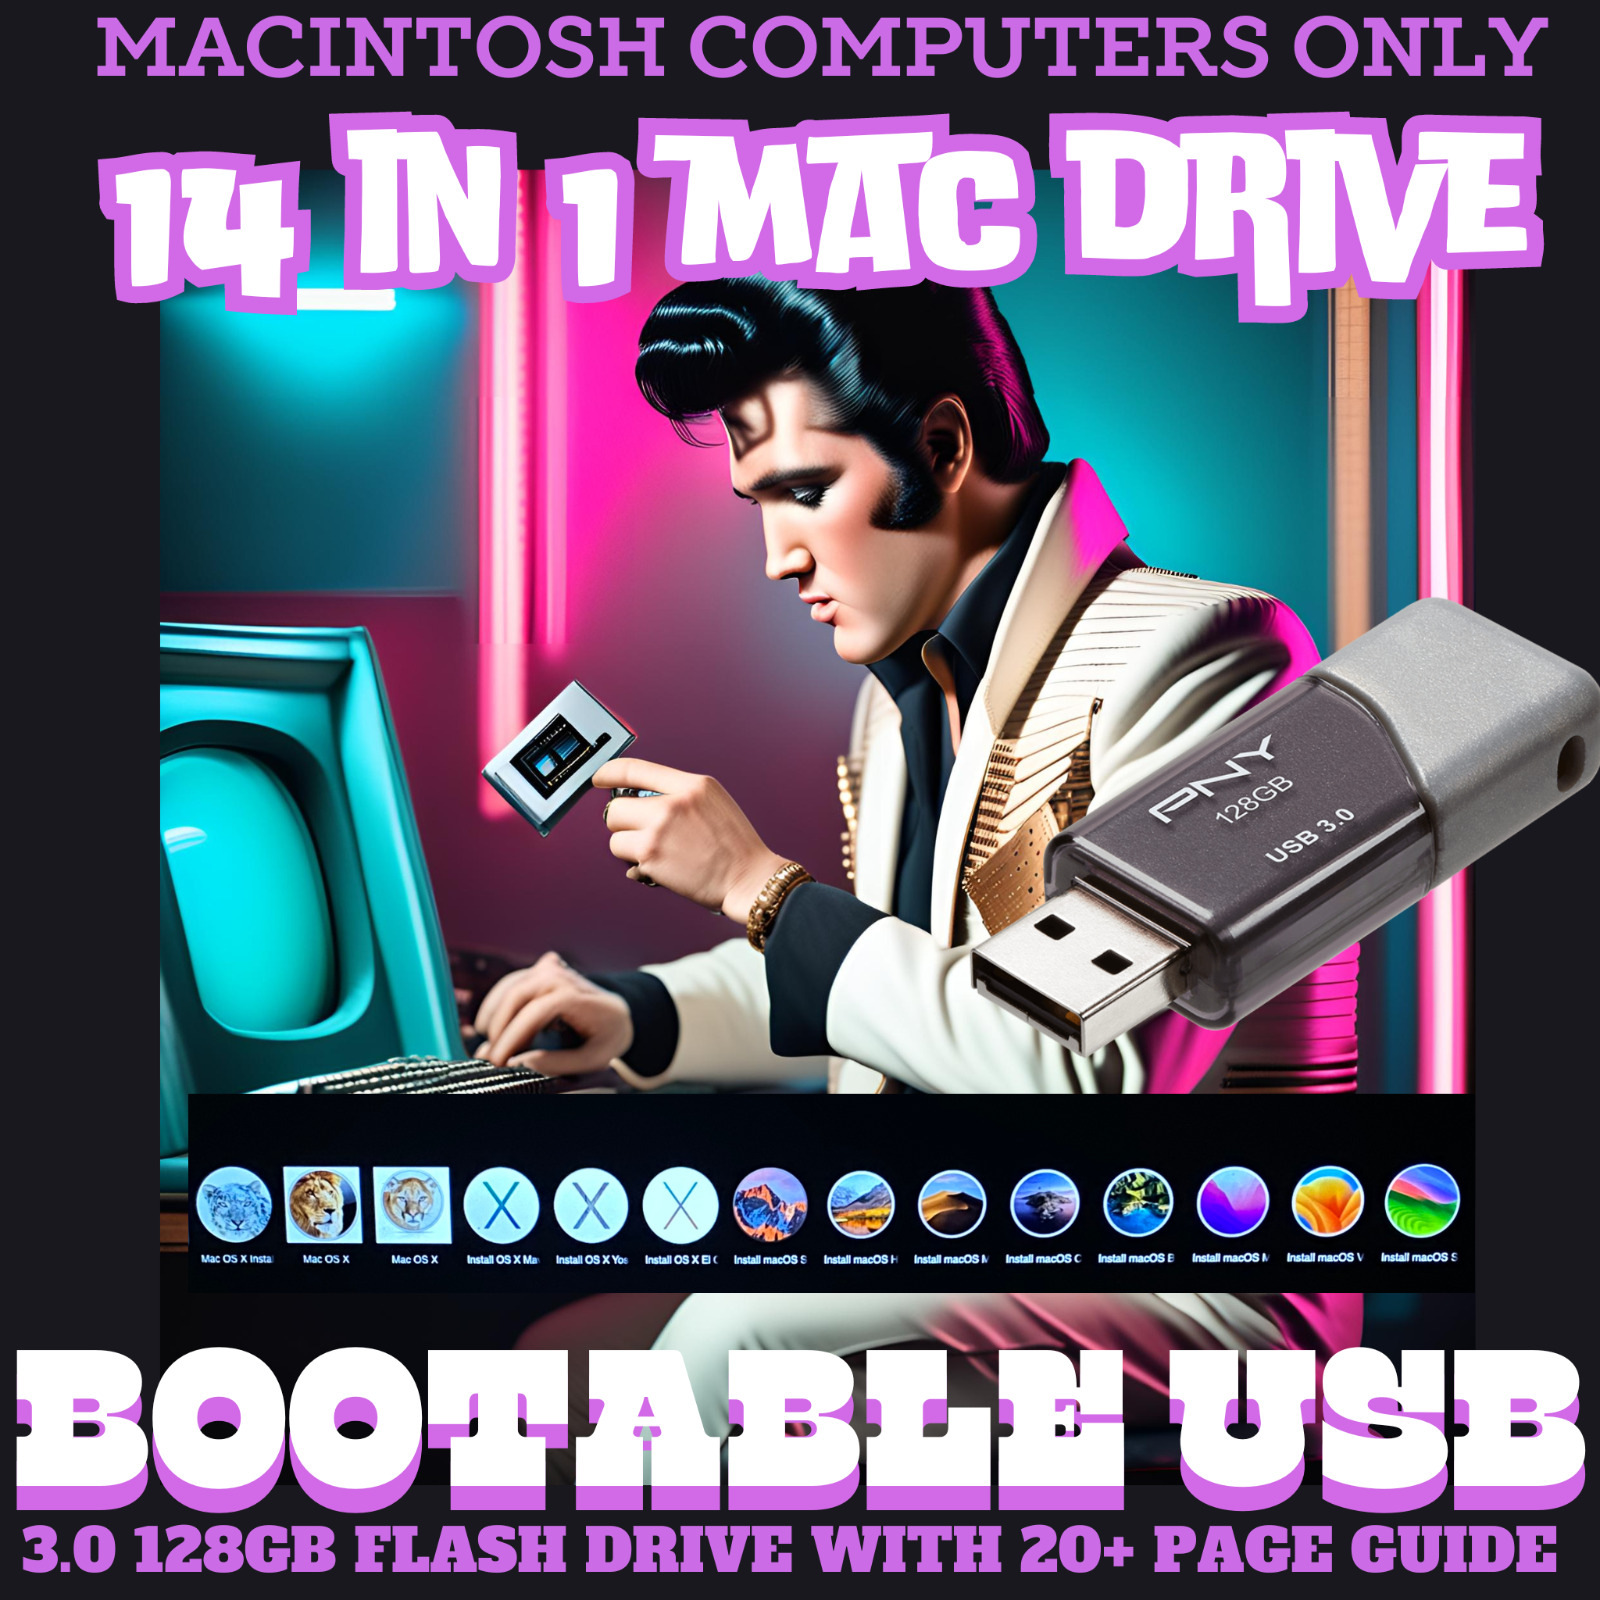 14 In 1 Mac Bootable USB Flash Drive 128GB Includes Printed Guide Tech Support